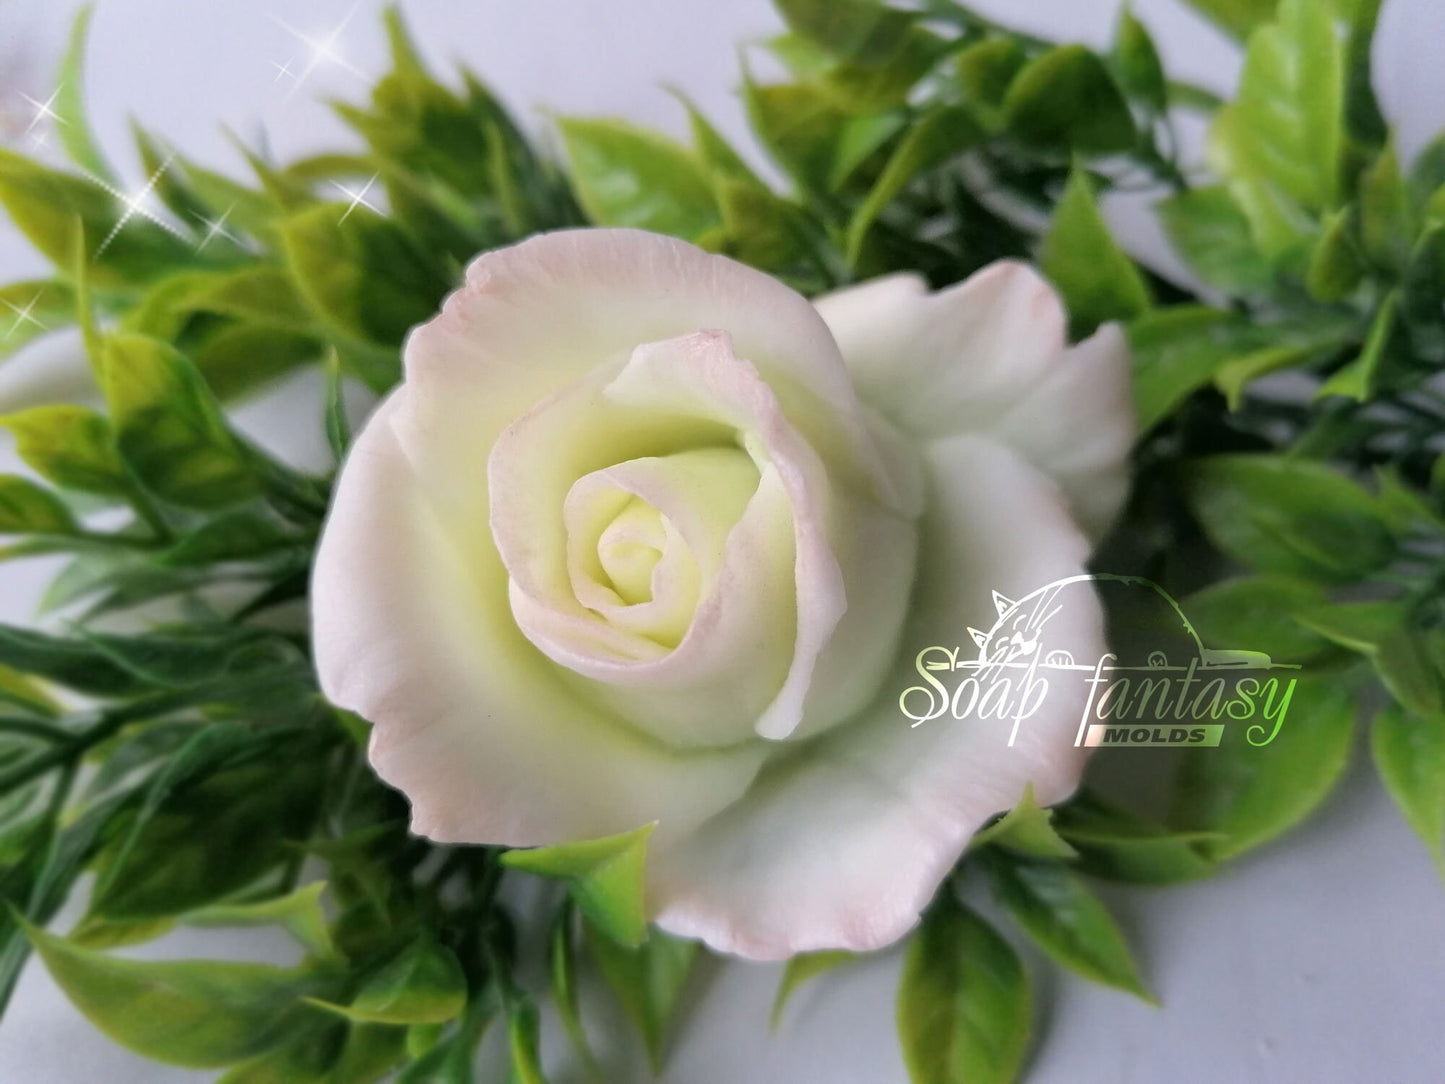 Rose "Glory" silicone soap mold - for soap making (Made of high quality silicone)